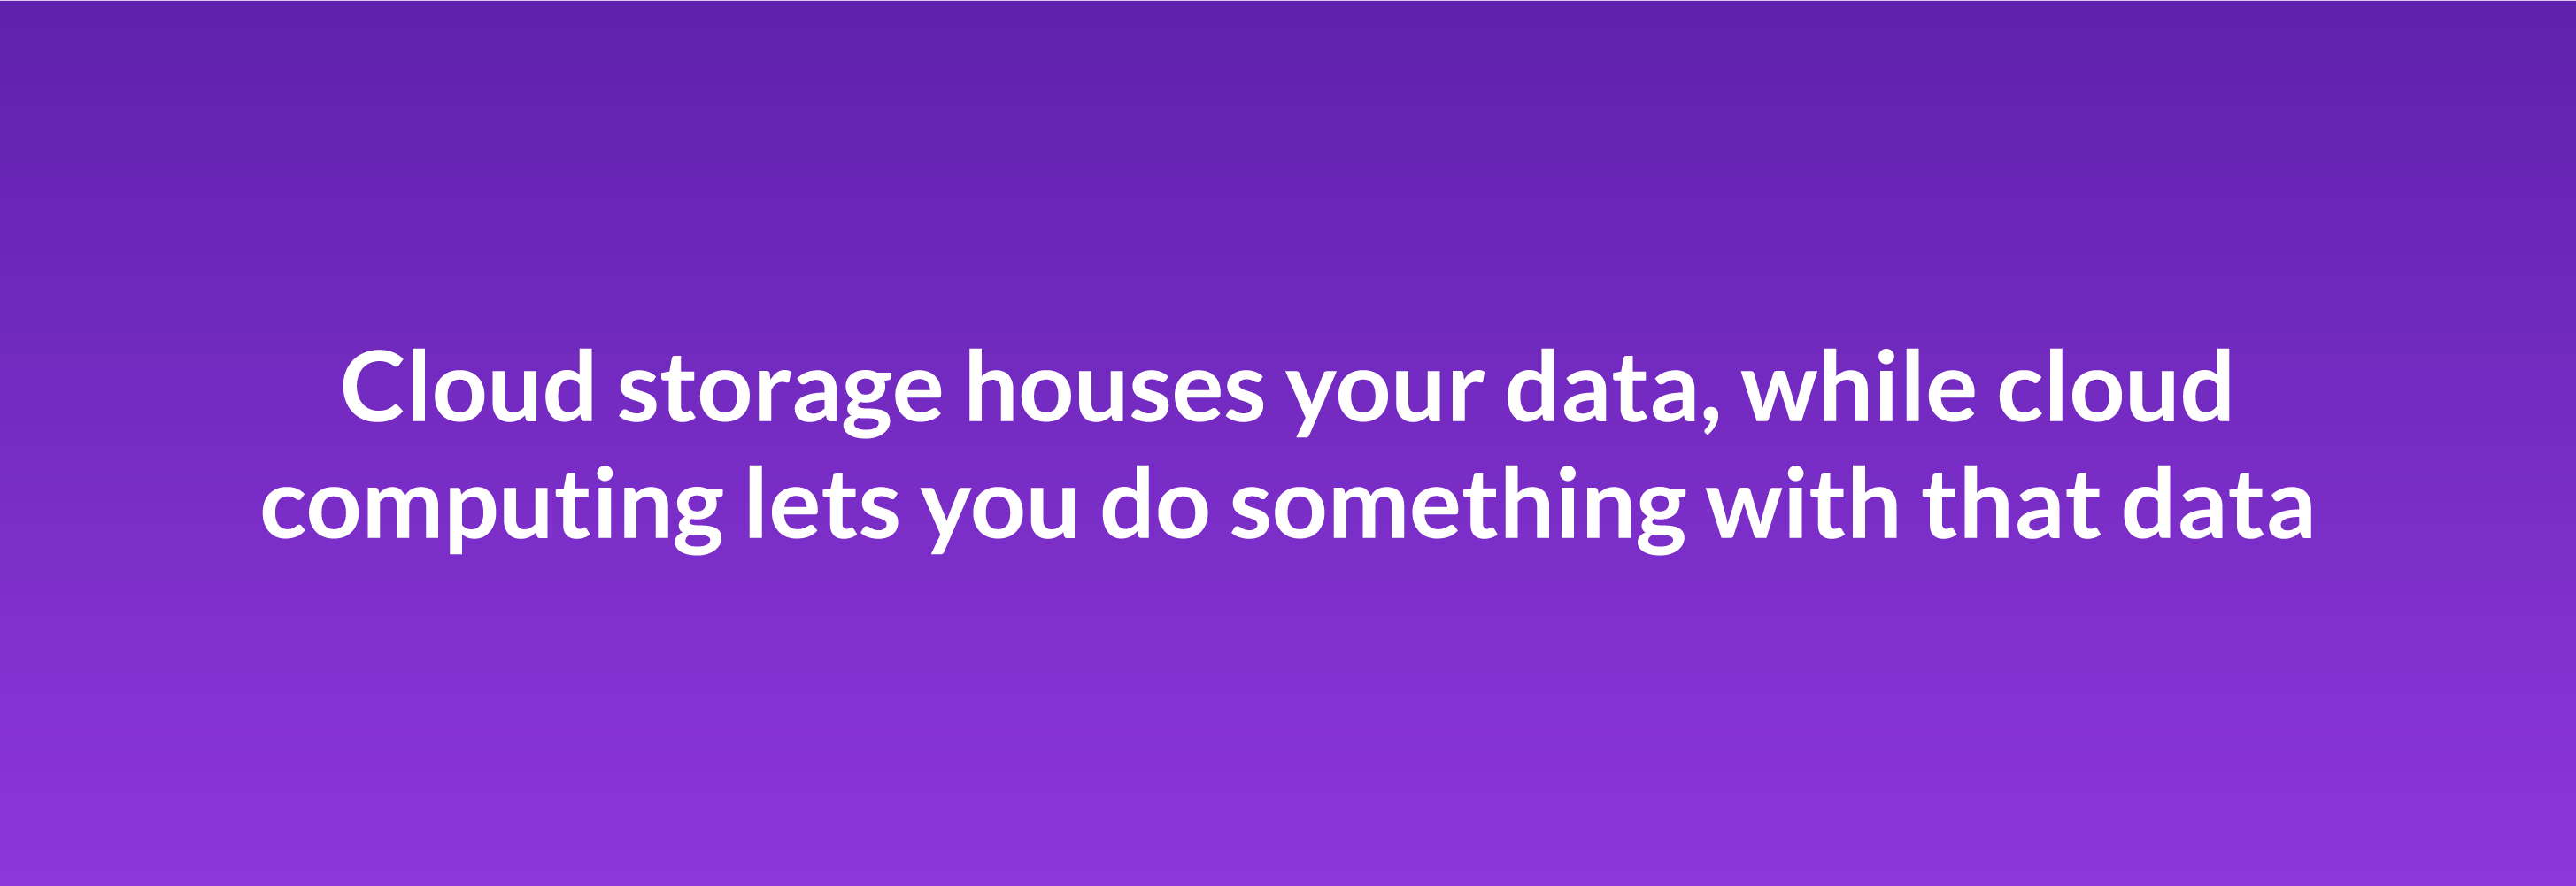 Cloud storage houses your data, while cloud computing lets you do something with that data